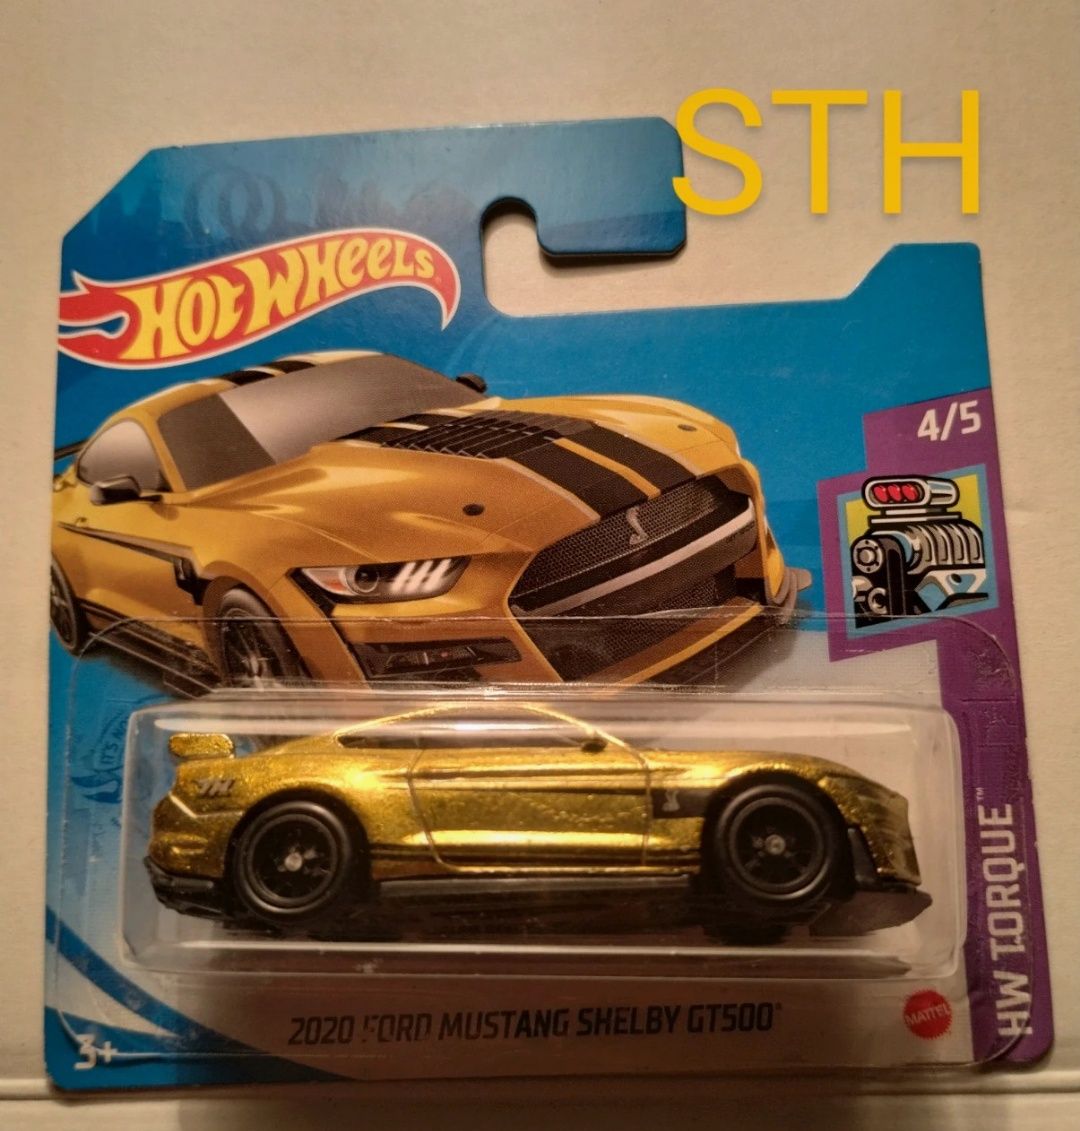 Hot wheels ford shelby sth